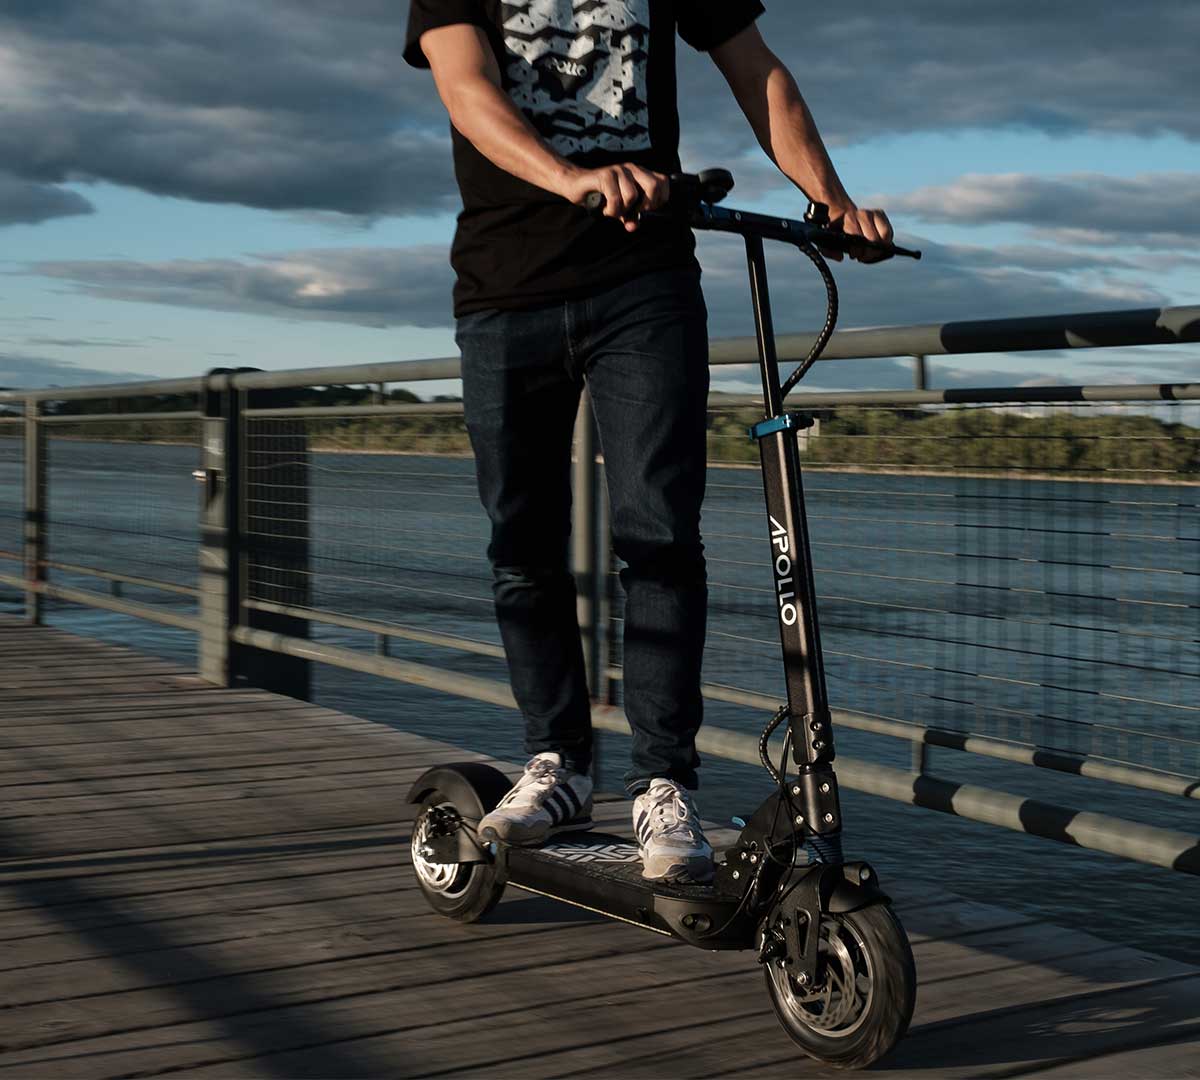 A person rides a high-quality electric scooter branded 'APOLLO' along a riverside boardwalk, demonstrating the scooter's sturdy design and adherence to safety standards with its robust frame and well-engineered wheels, ensuring a safe commuting experience